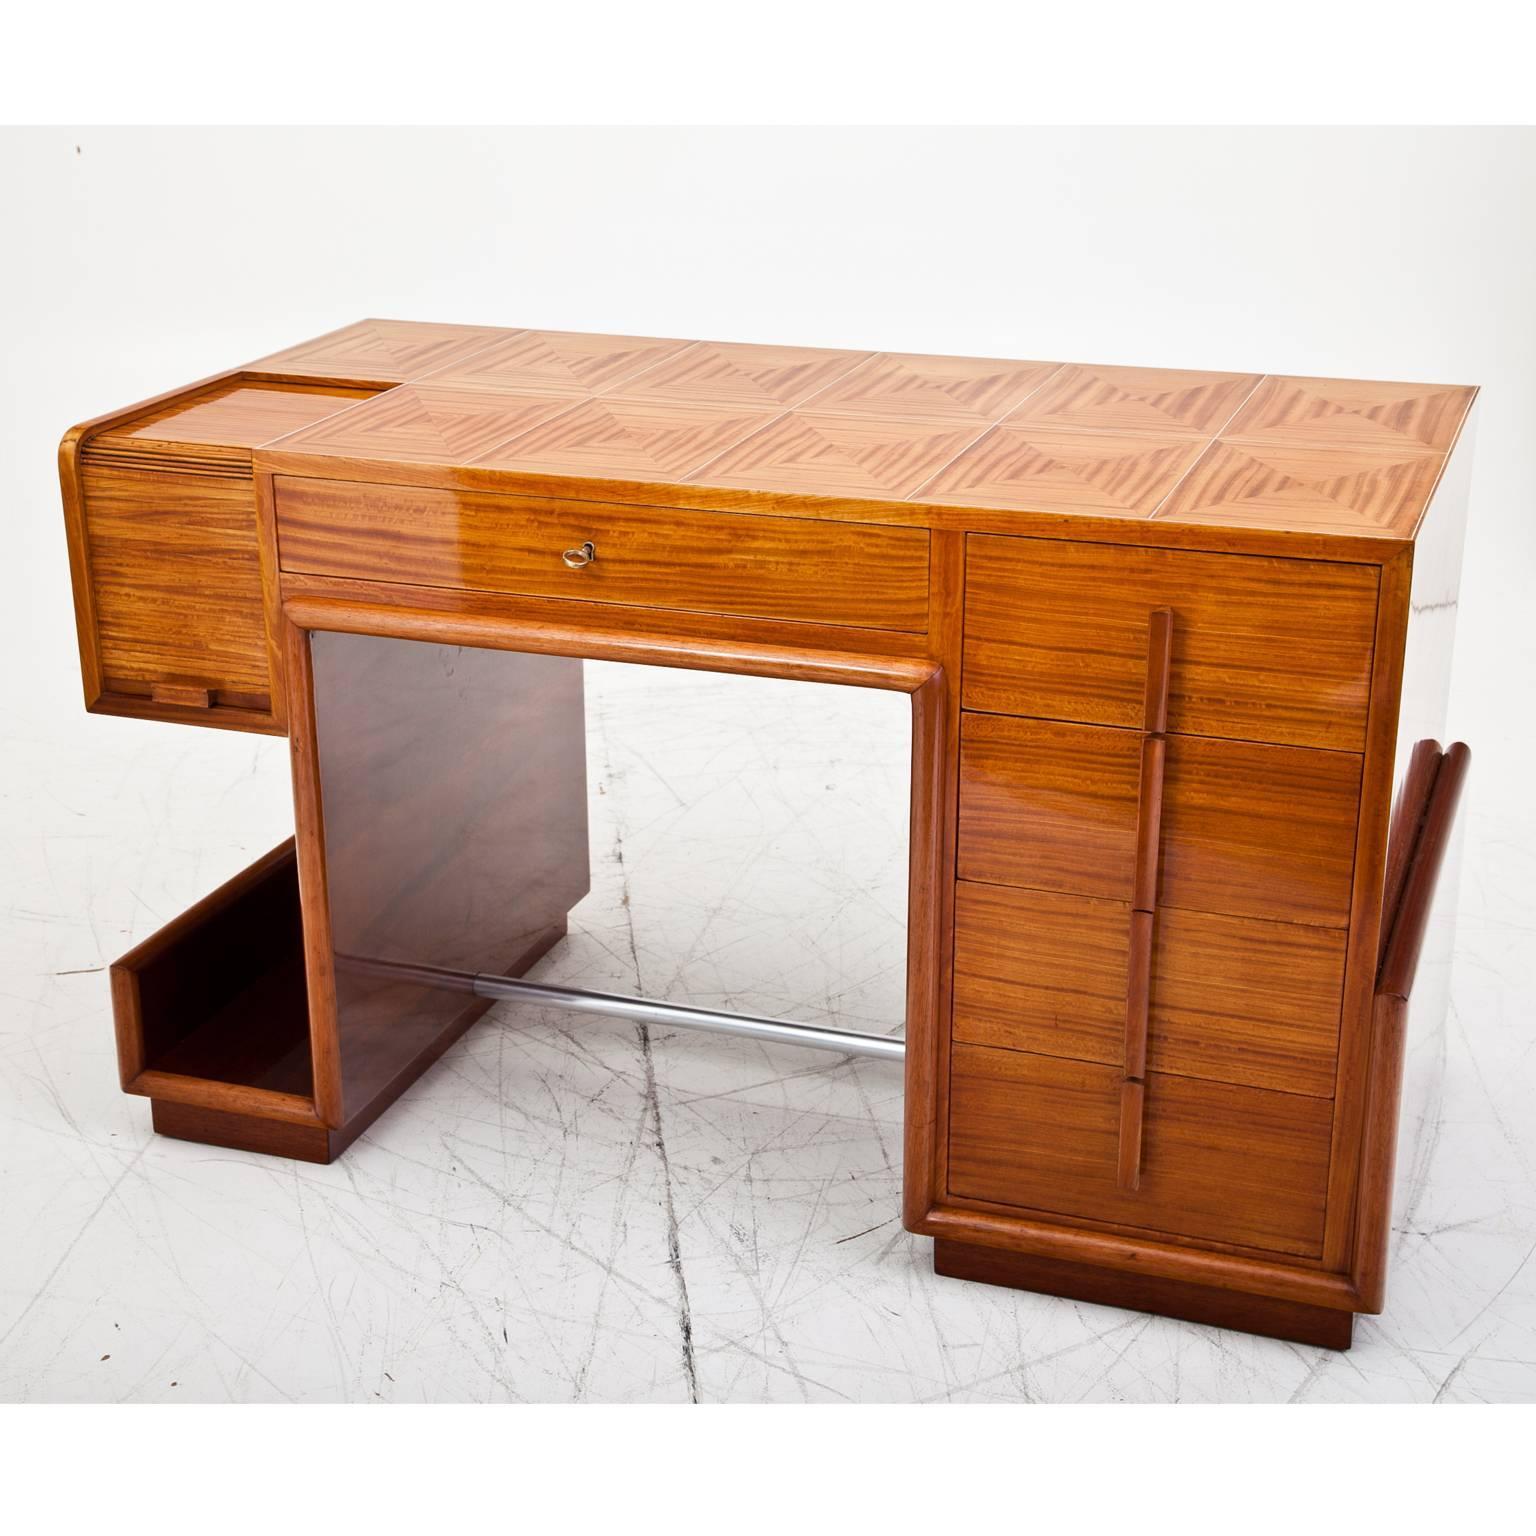 Small Art Deco desk with shelfing space on the side, five drawers and a compartment with shutter lid. The surface shows a very beautiful veneer pattern. The desk was professionally restored.